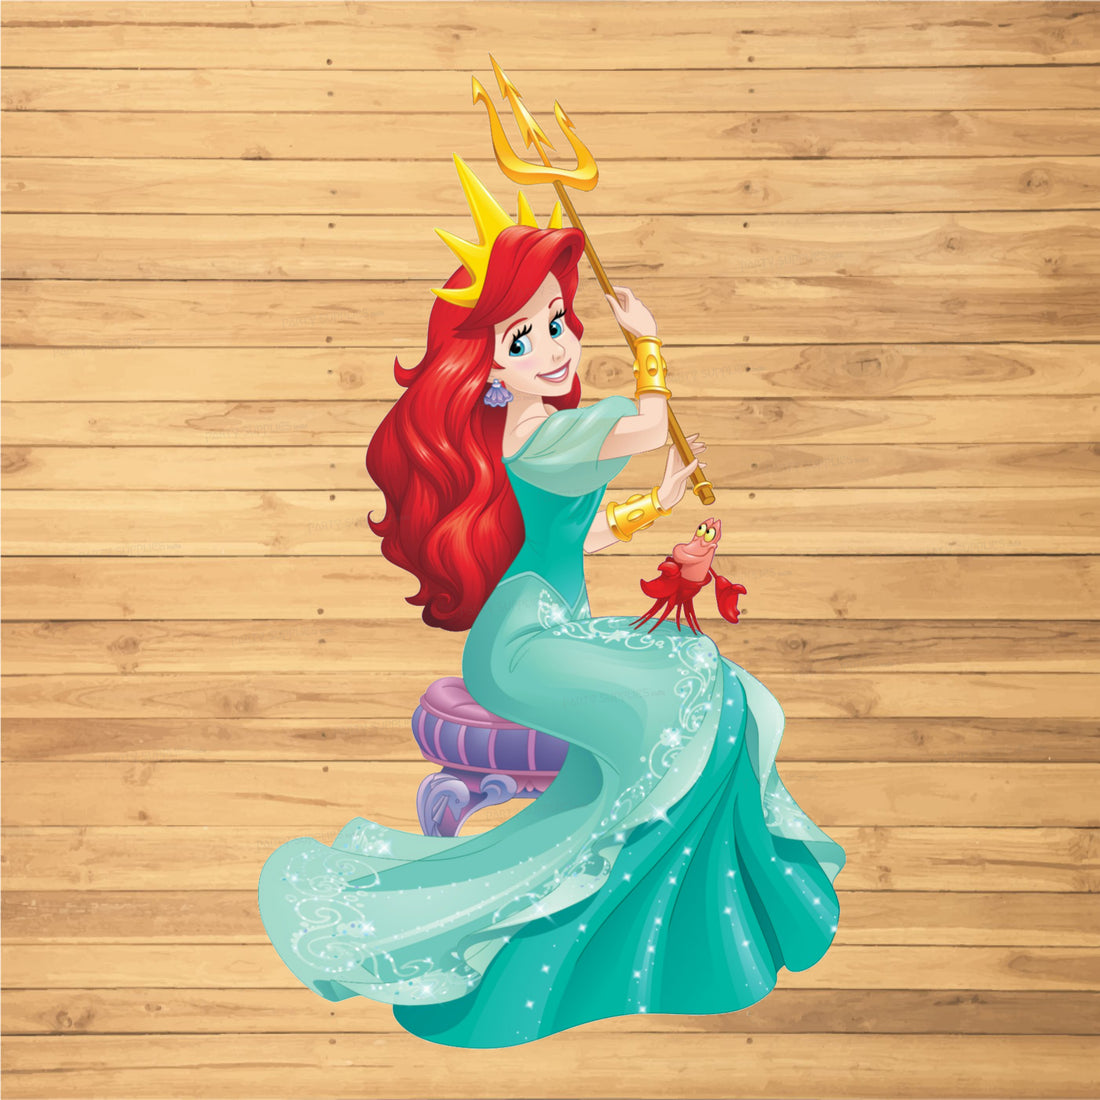 Mermaid Theme with Trident Cutout